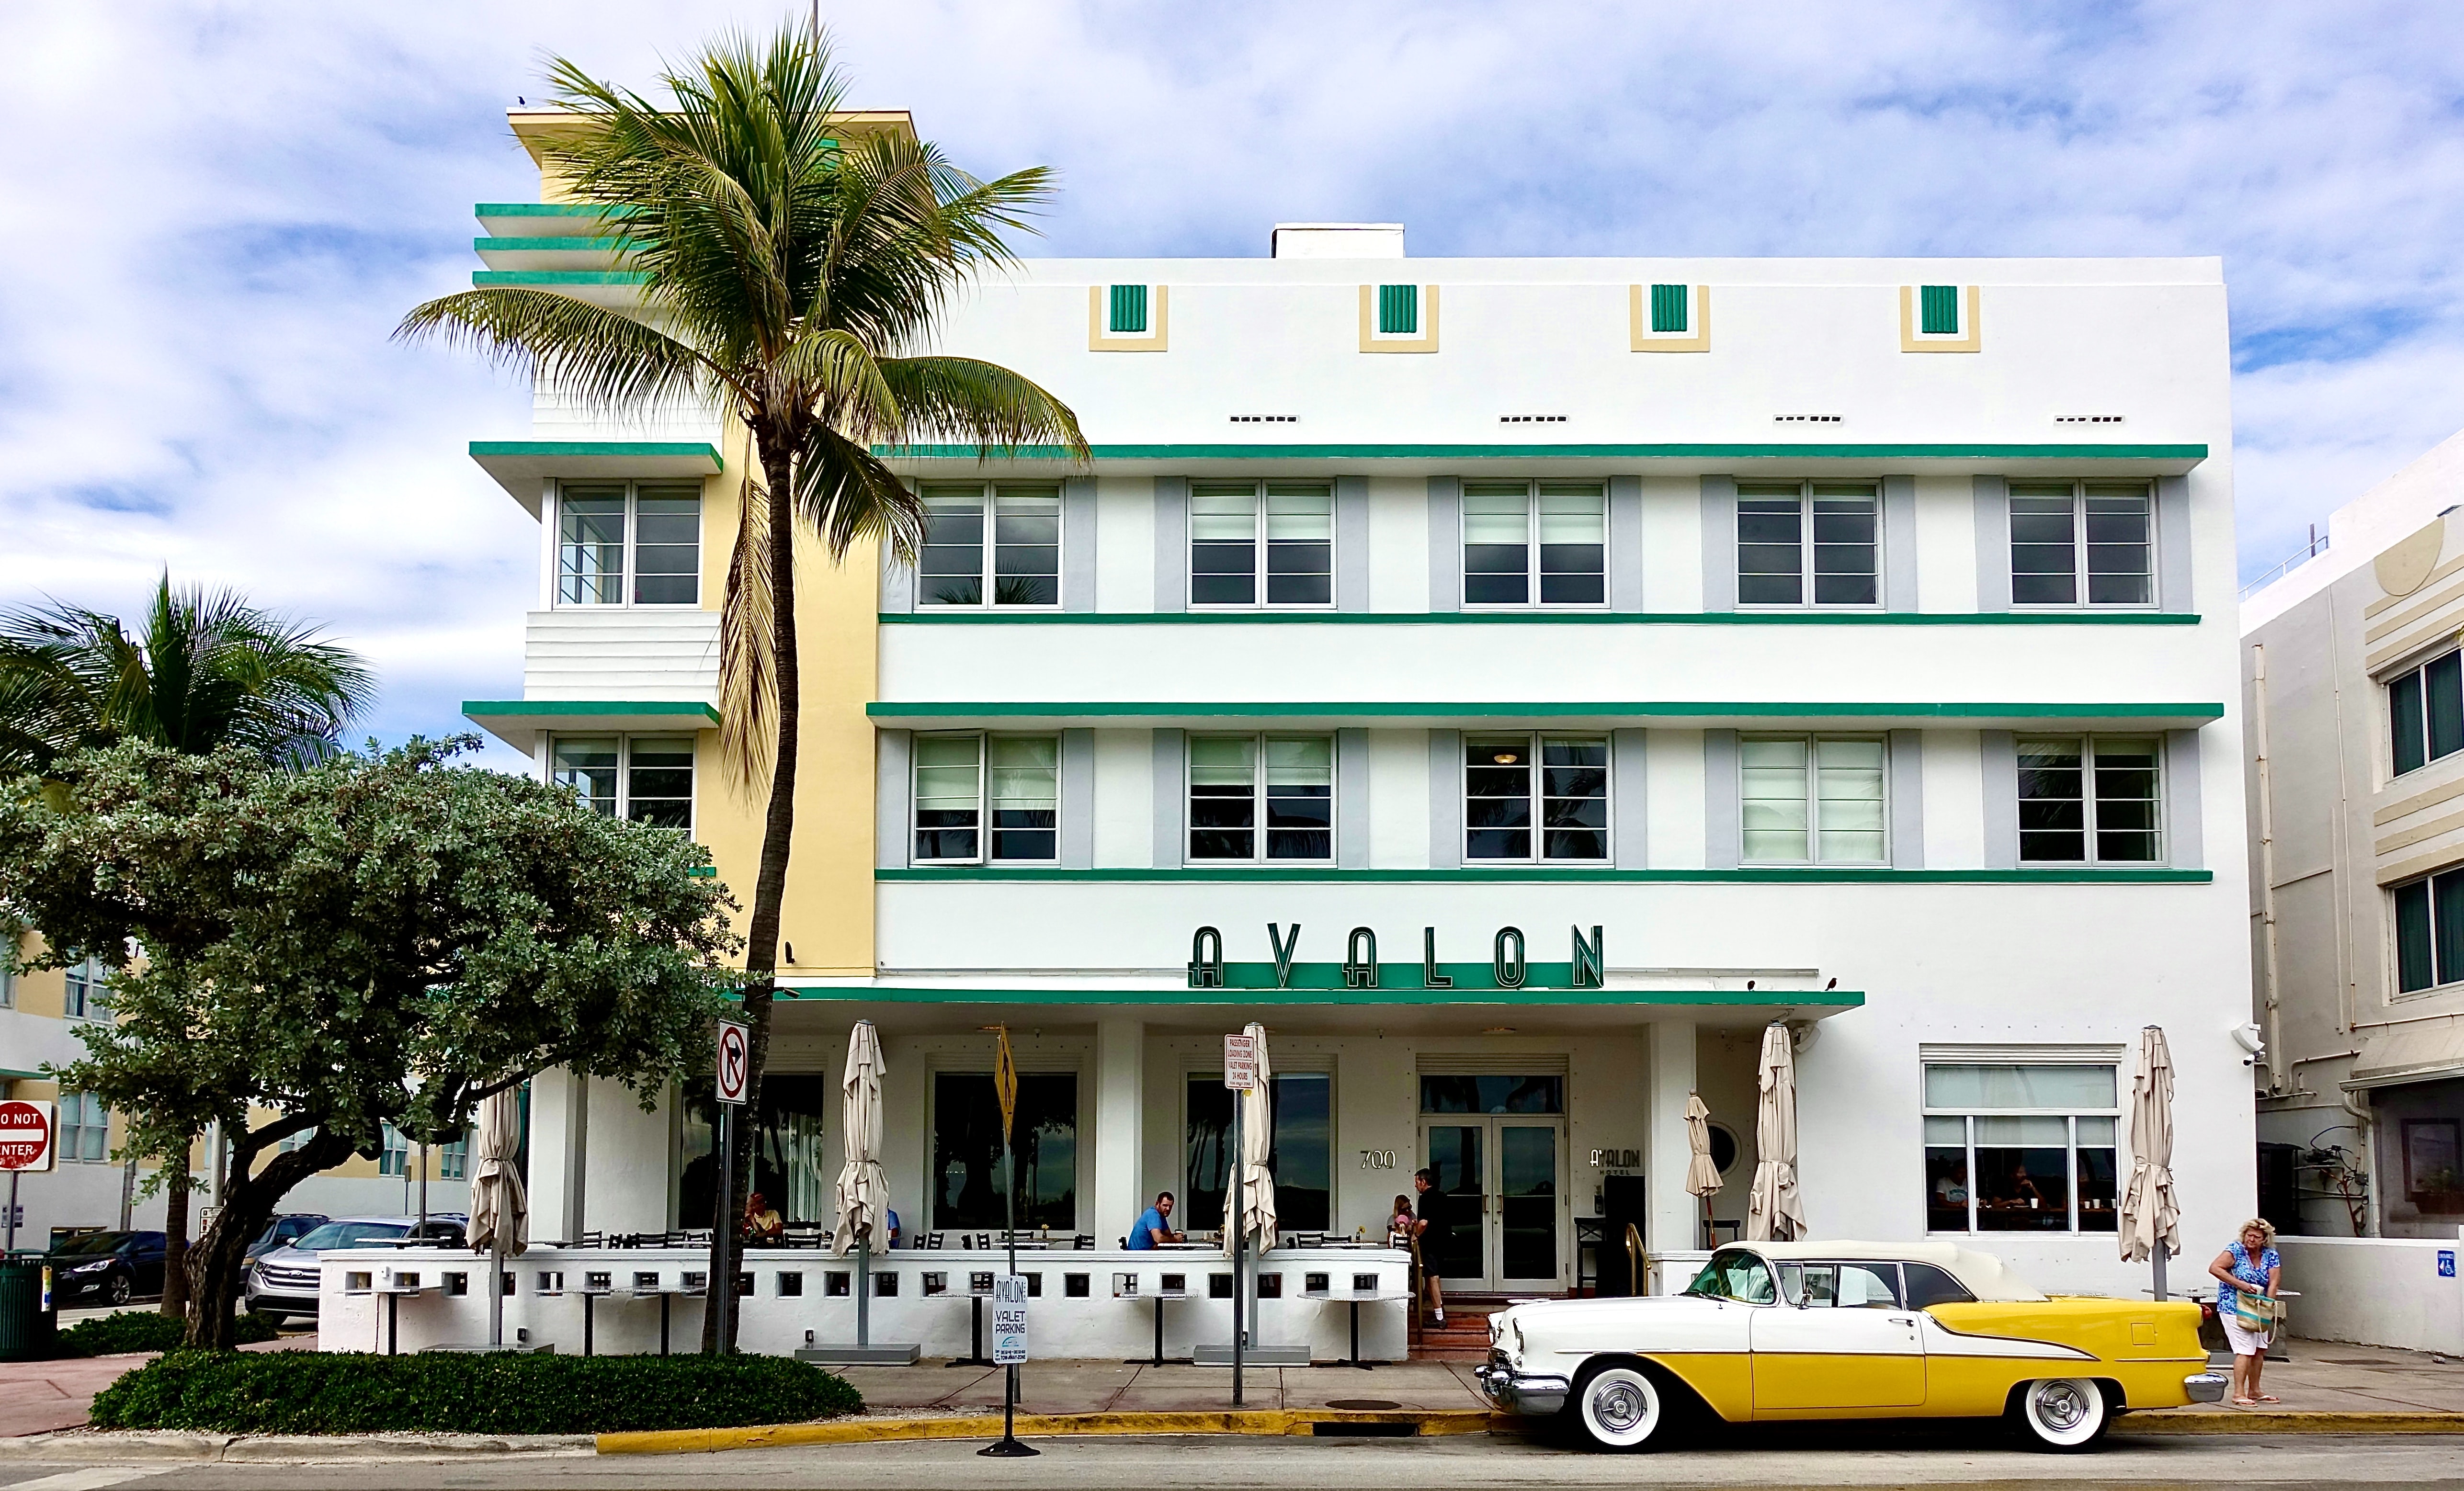 A vintage car parked in front of the Avalon hotel in Miami Beach